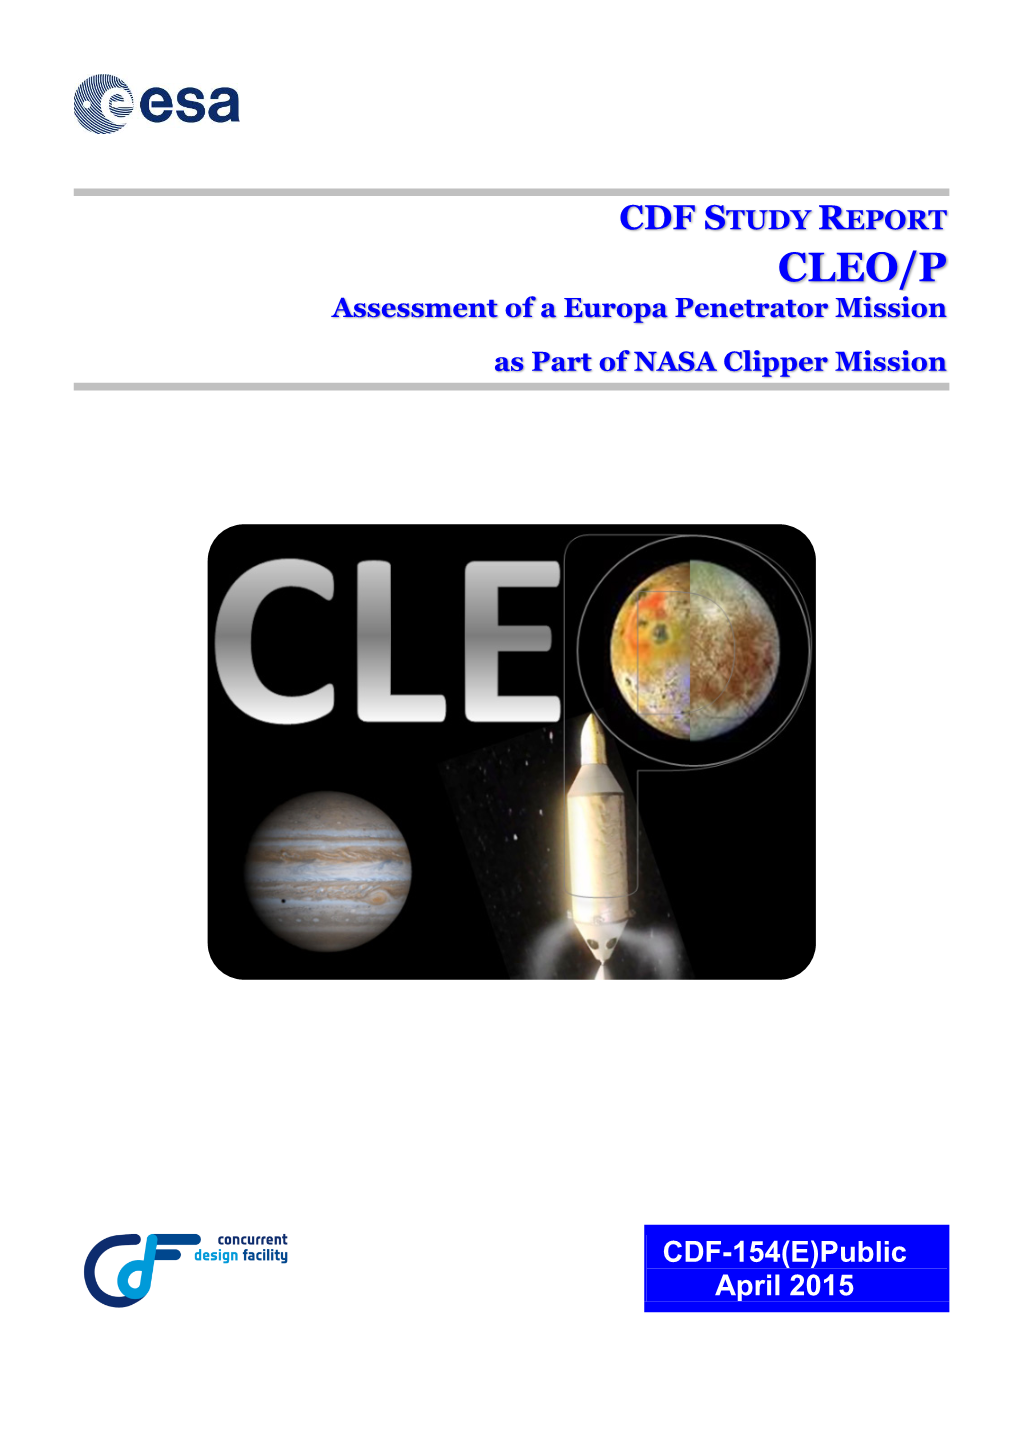 CLEO/P Assessment of a Europa Penetrator Mission As Part of NASA Clipper Mission